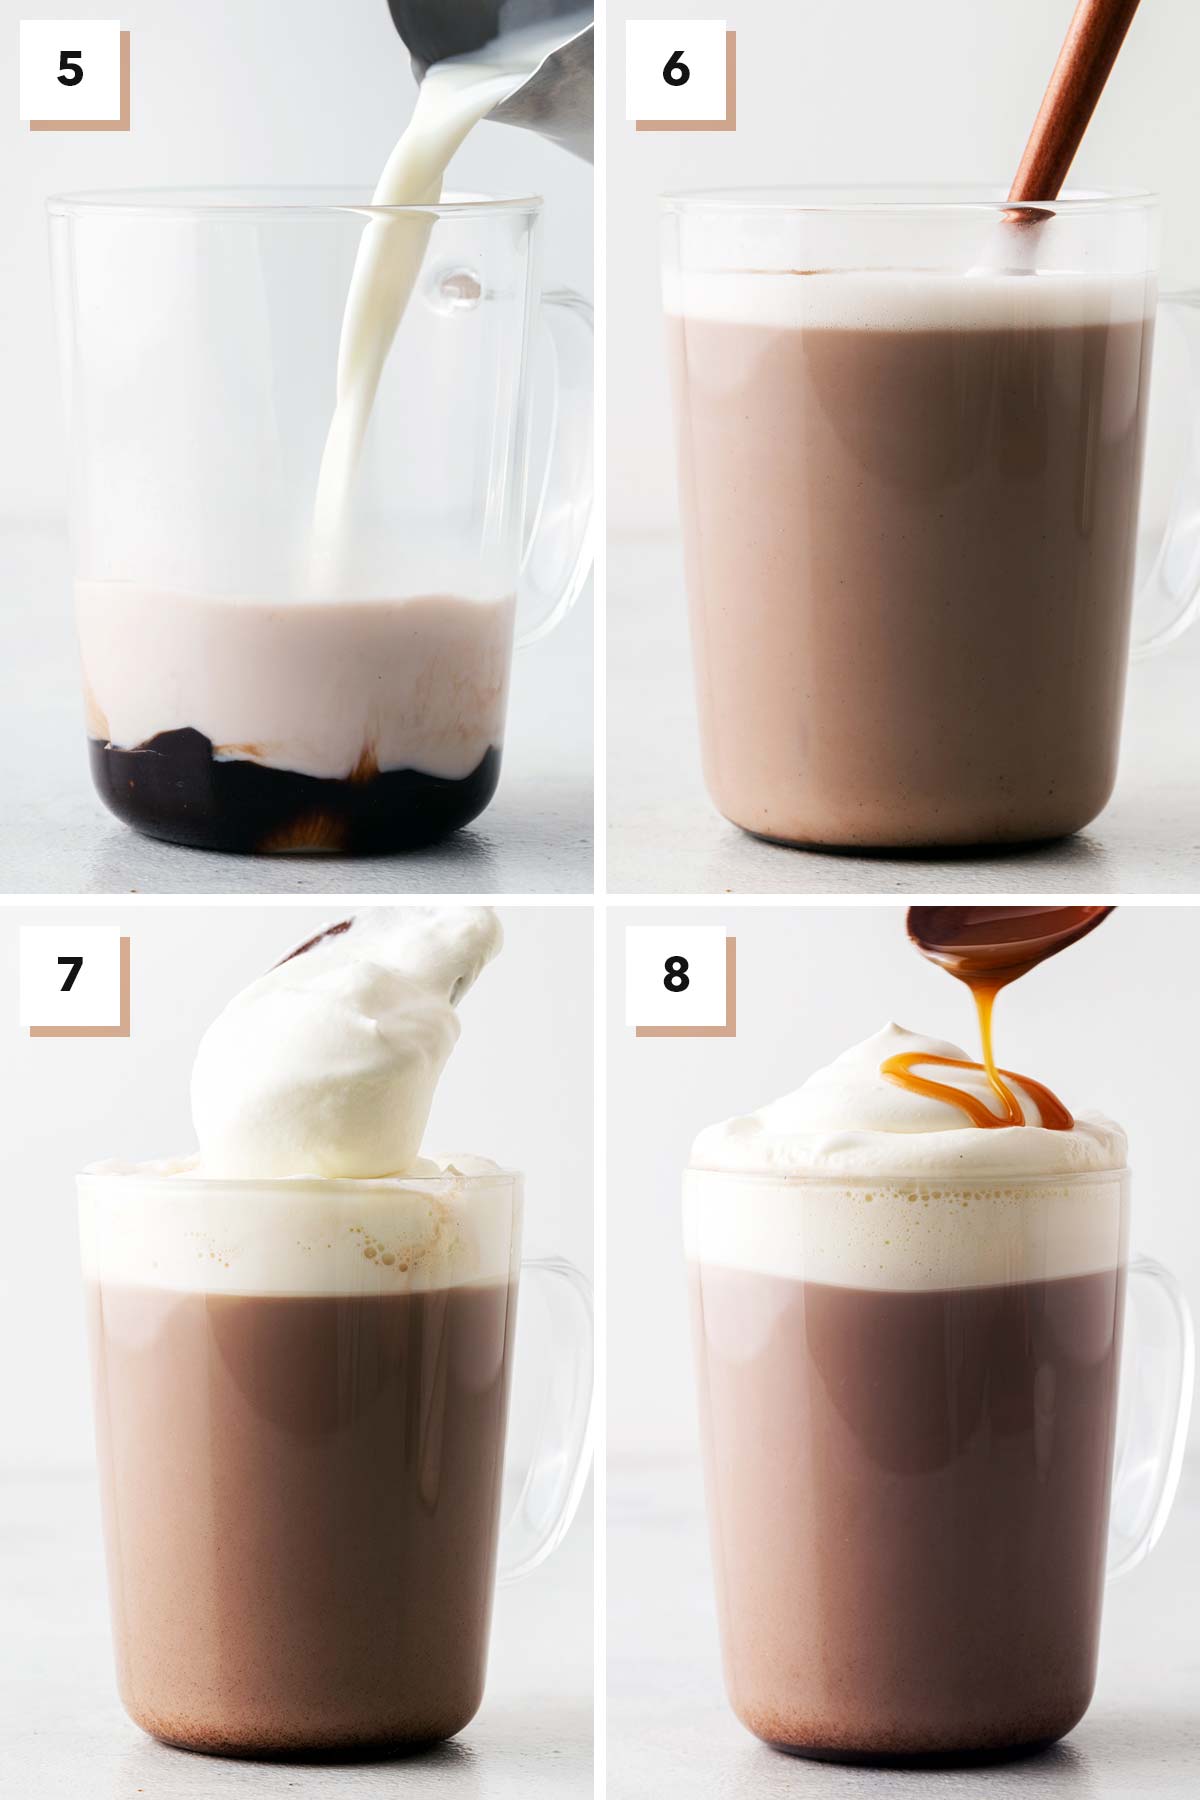 Last 4 steps to make Salted Caramel Hot Chocolate.